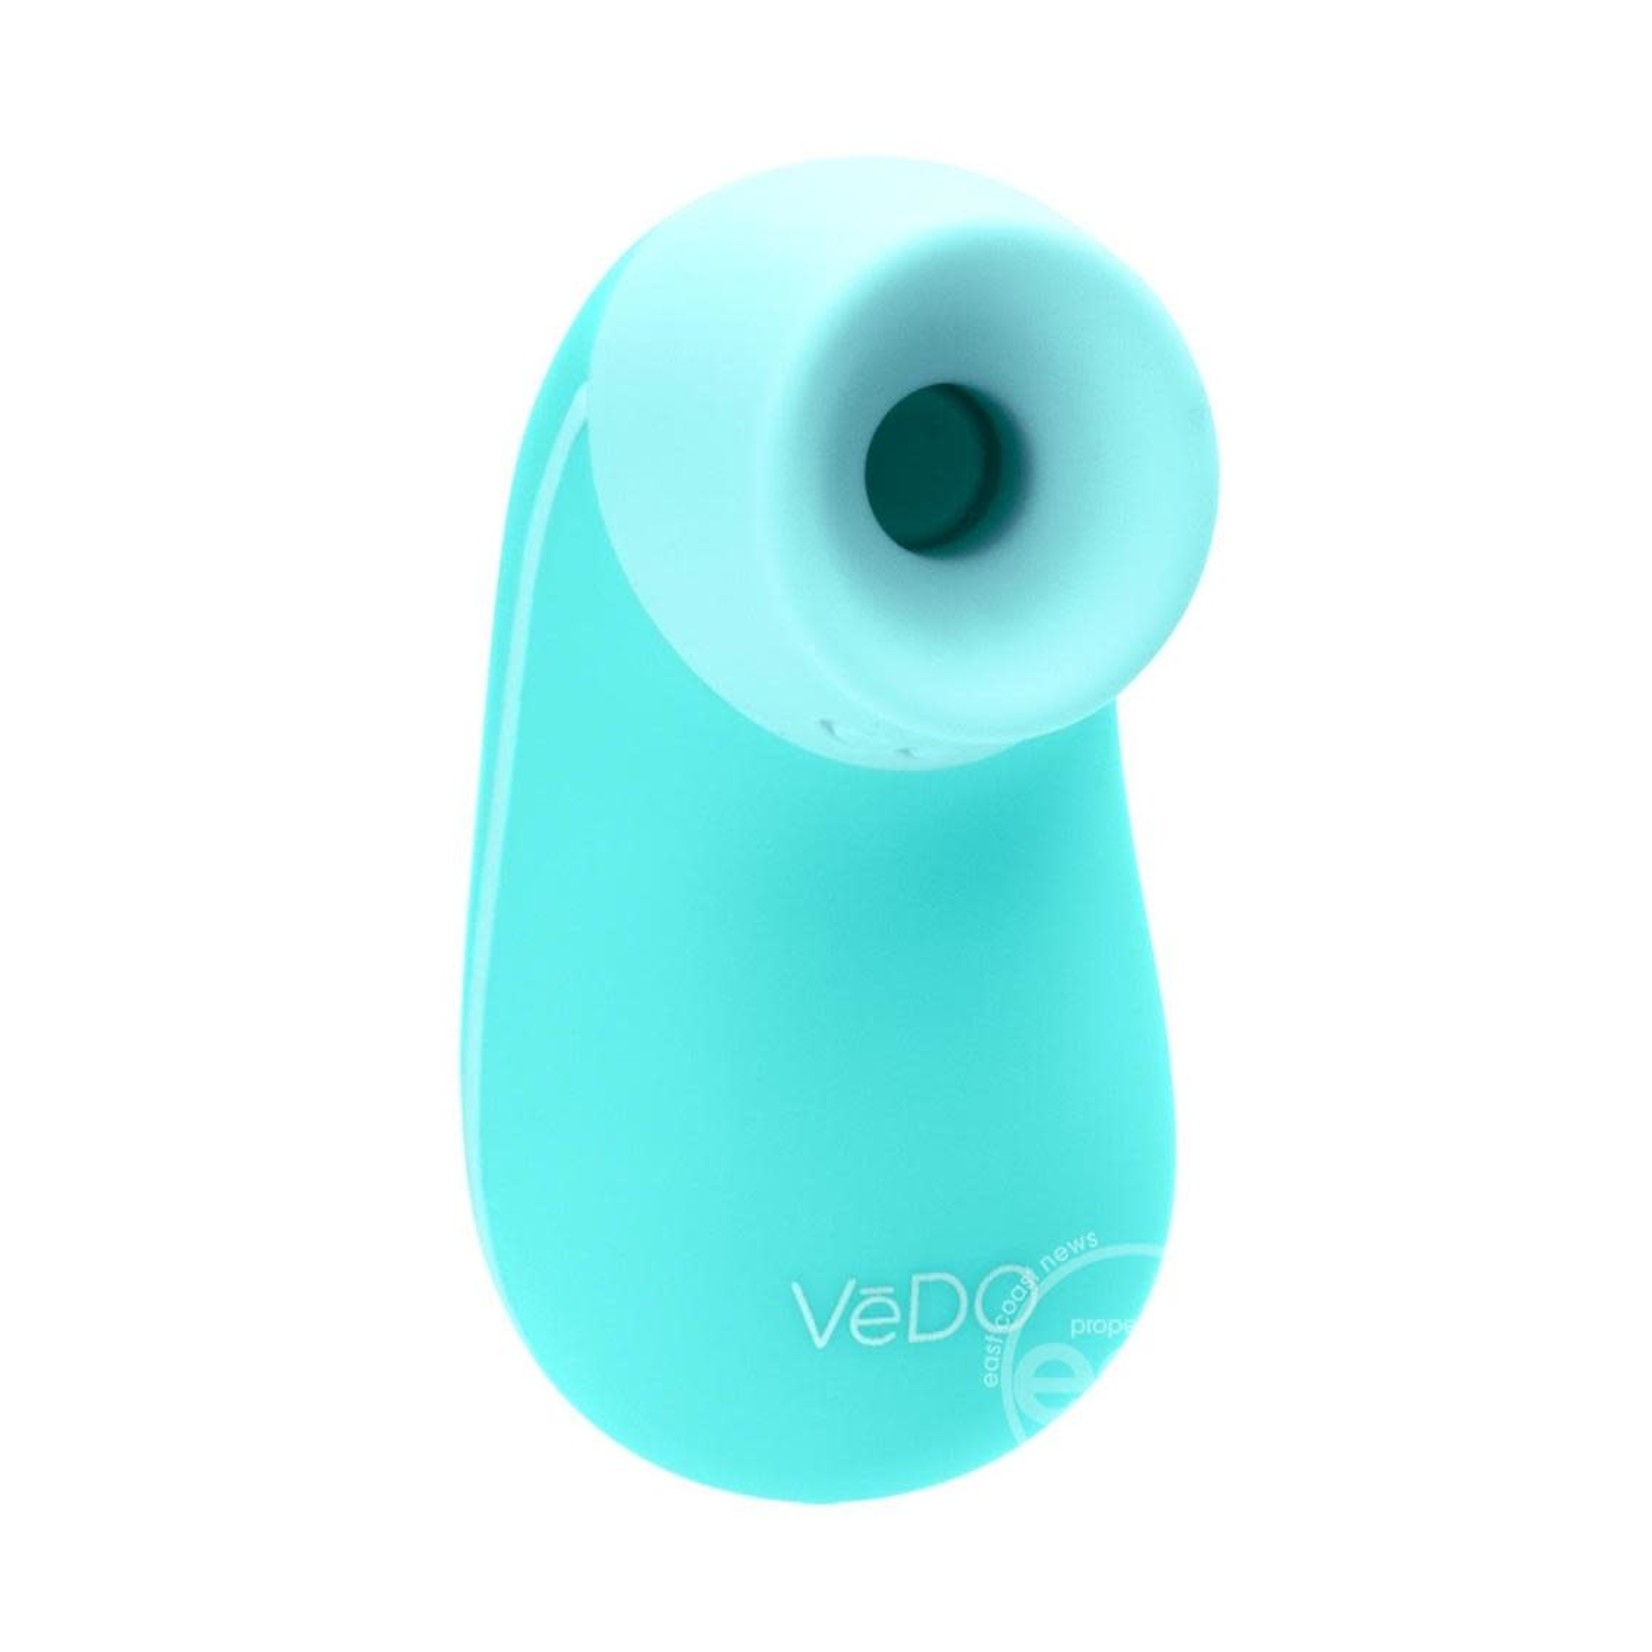 Nami "Tease Me" Silicone Rechargeable Sonic Vibrator - Turquoise